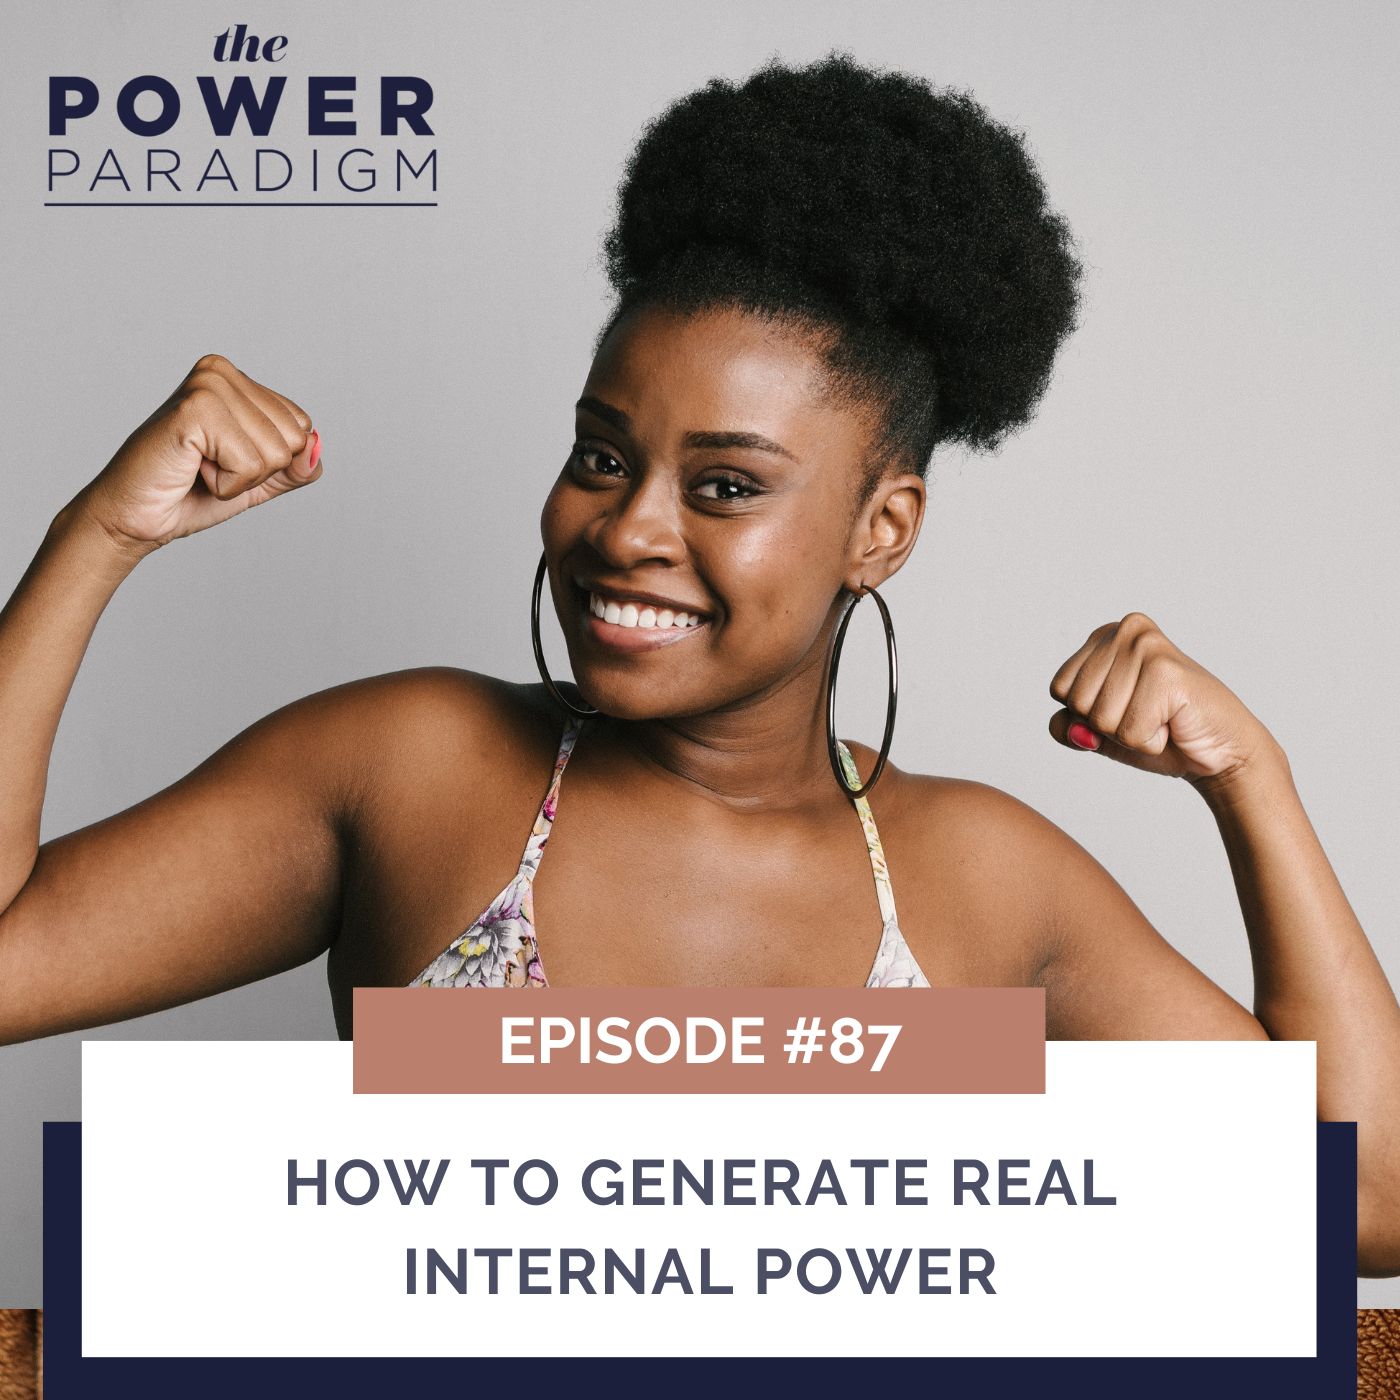 The Power Paradigm™ | How to Generate Real Internal Power